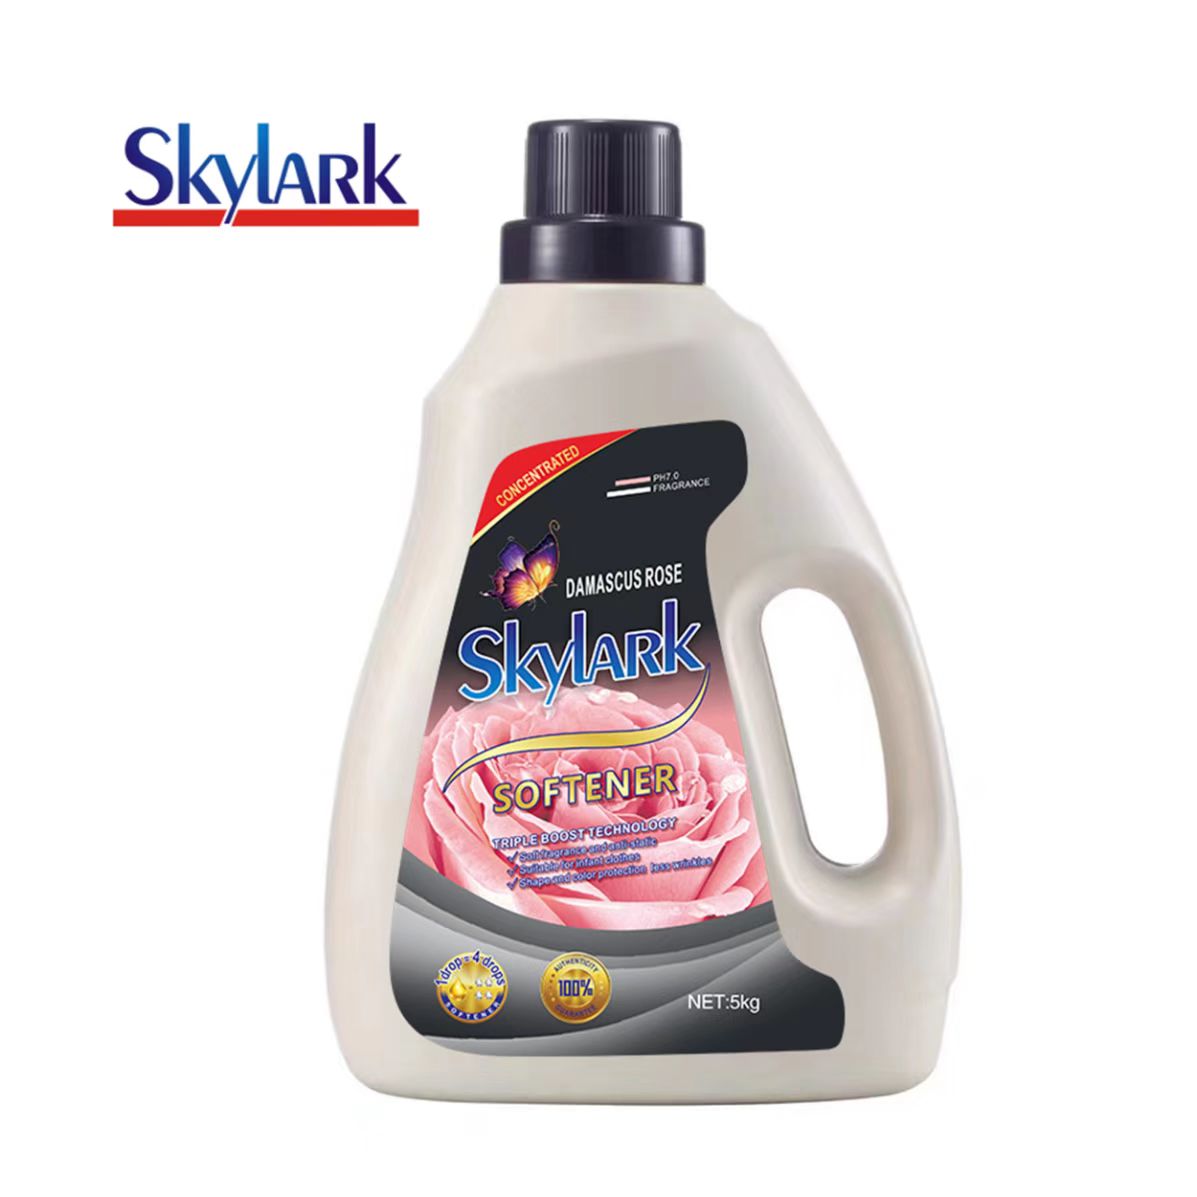 Super Damascus Rose Concentrated Type Fabric Softener With Excellent Performance Featured Image